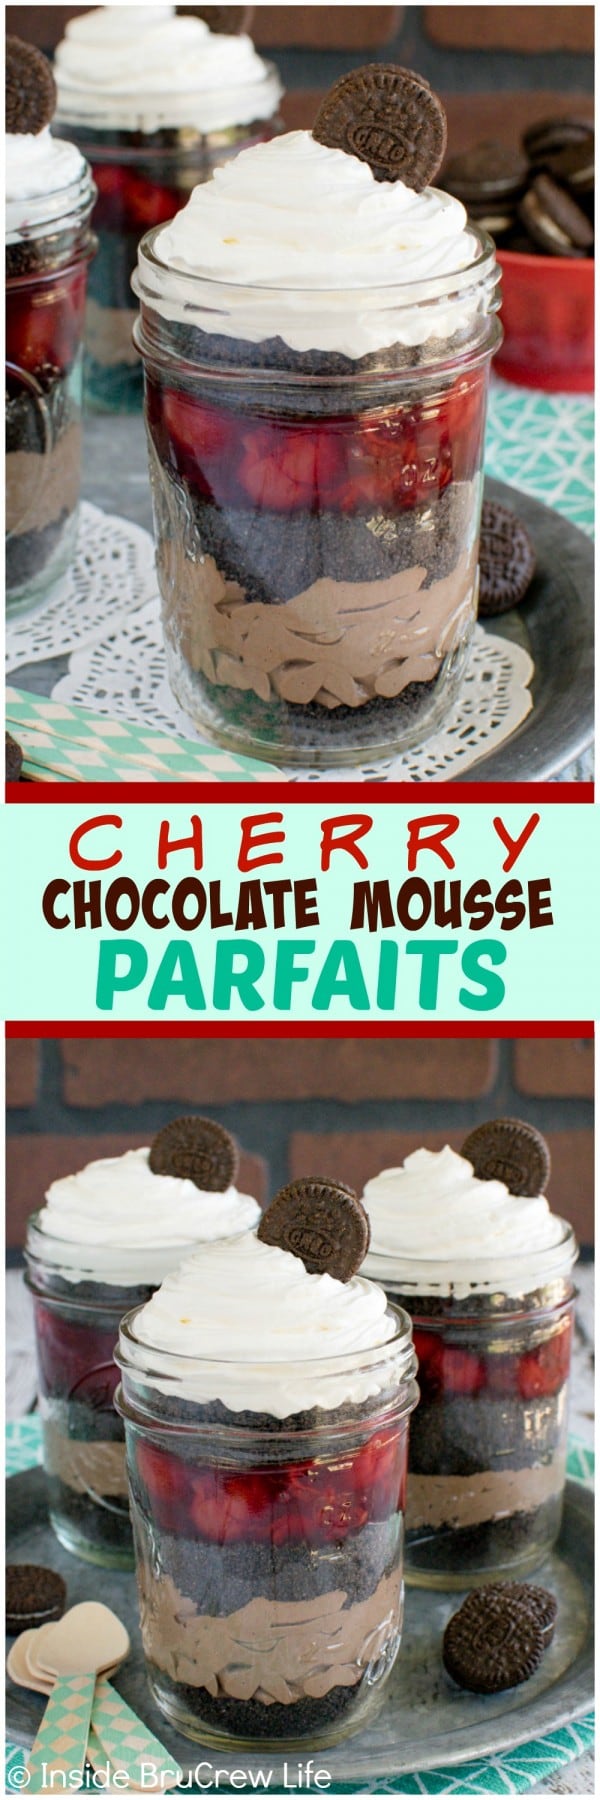 Cherry Chocolate Mousse Parfaits - layers of cherry pie filling, cookies, and chocolate makes a fun no bake treat for parties and picnics. Easy dessert recipe!